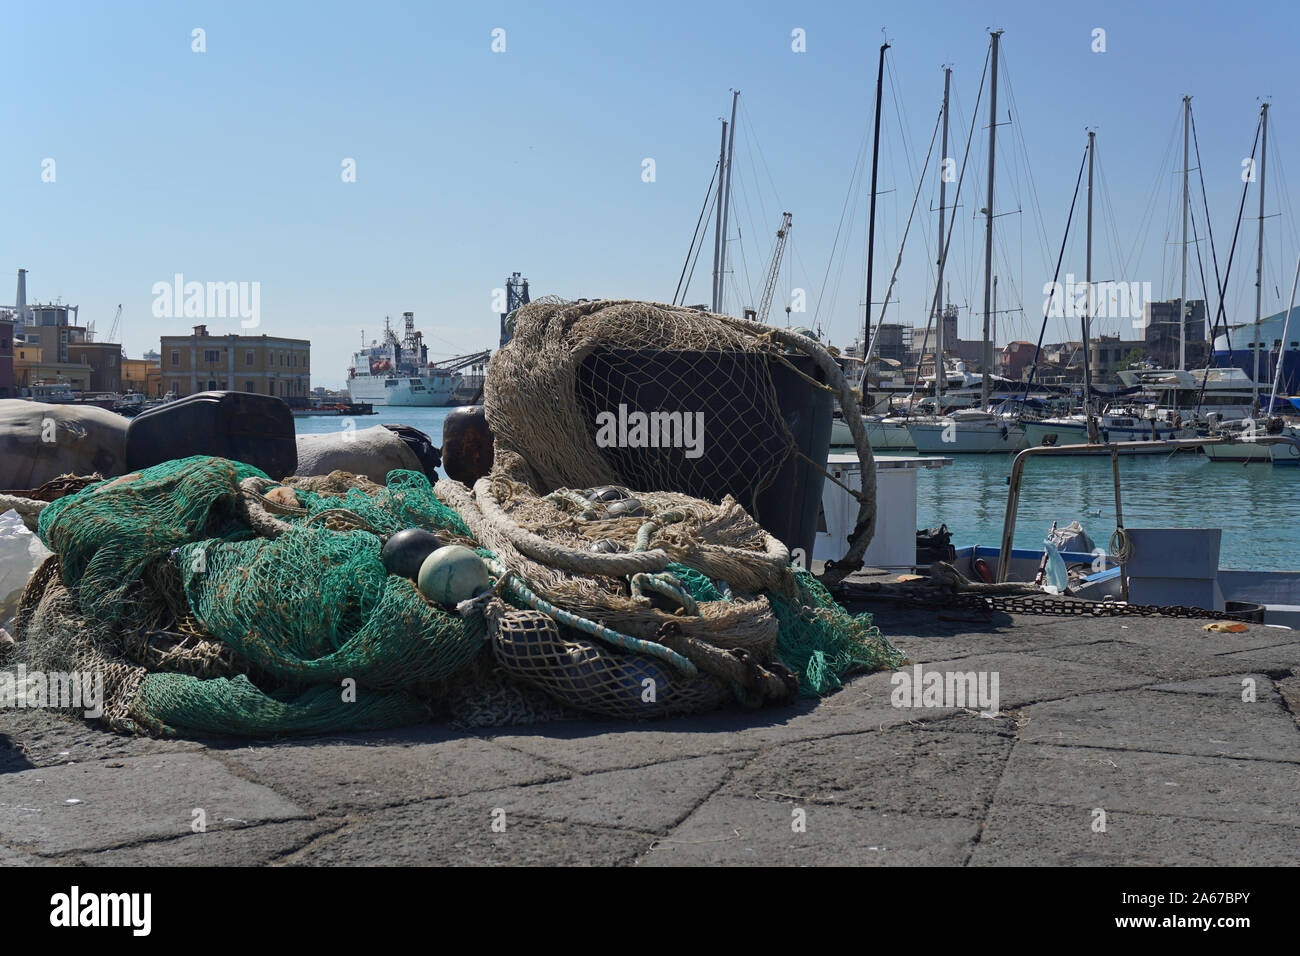 Fishing nets and floats on the dockside at a commercial dock Stock